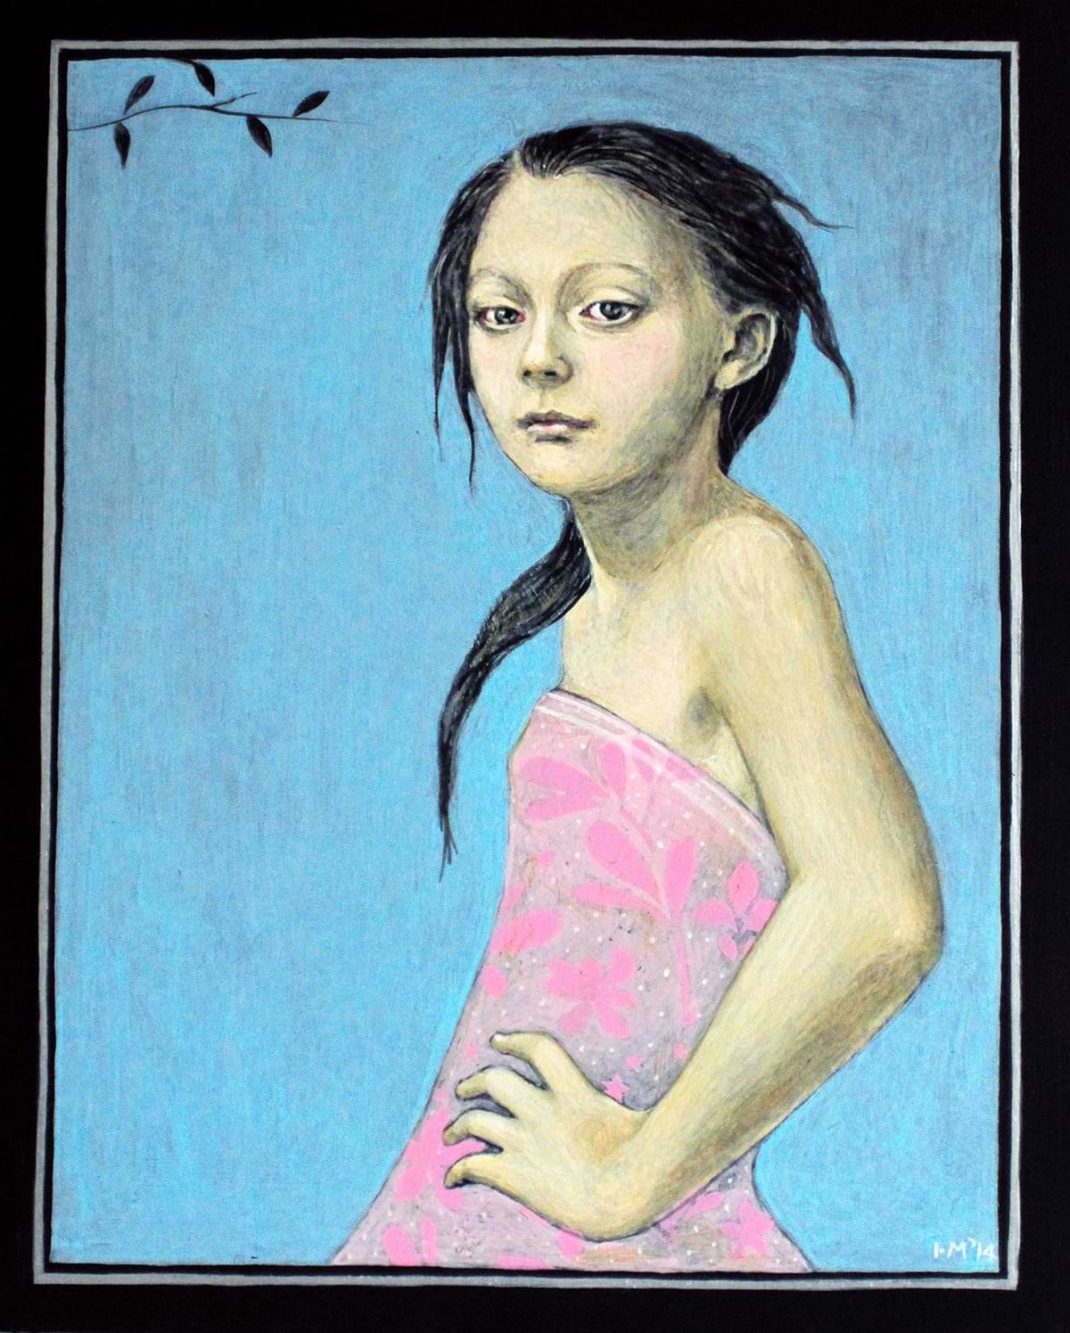 Painting by I. Bonatsou Aeriko. 40Χ32cm Acrylics .Young girl in pink dress on a light blue background 